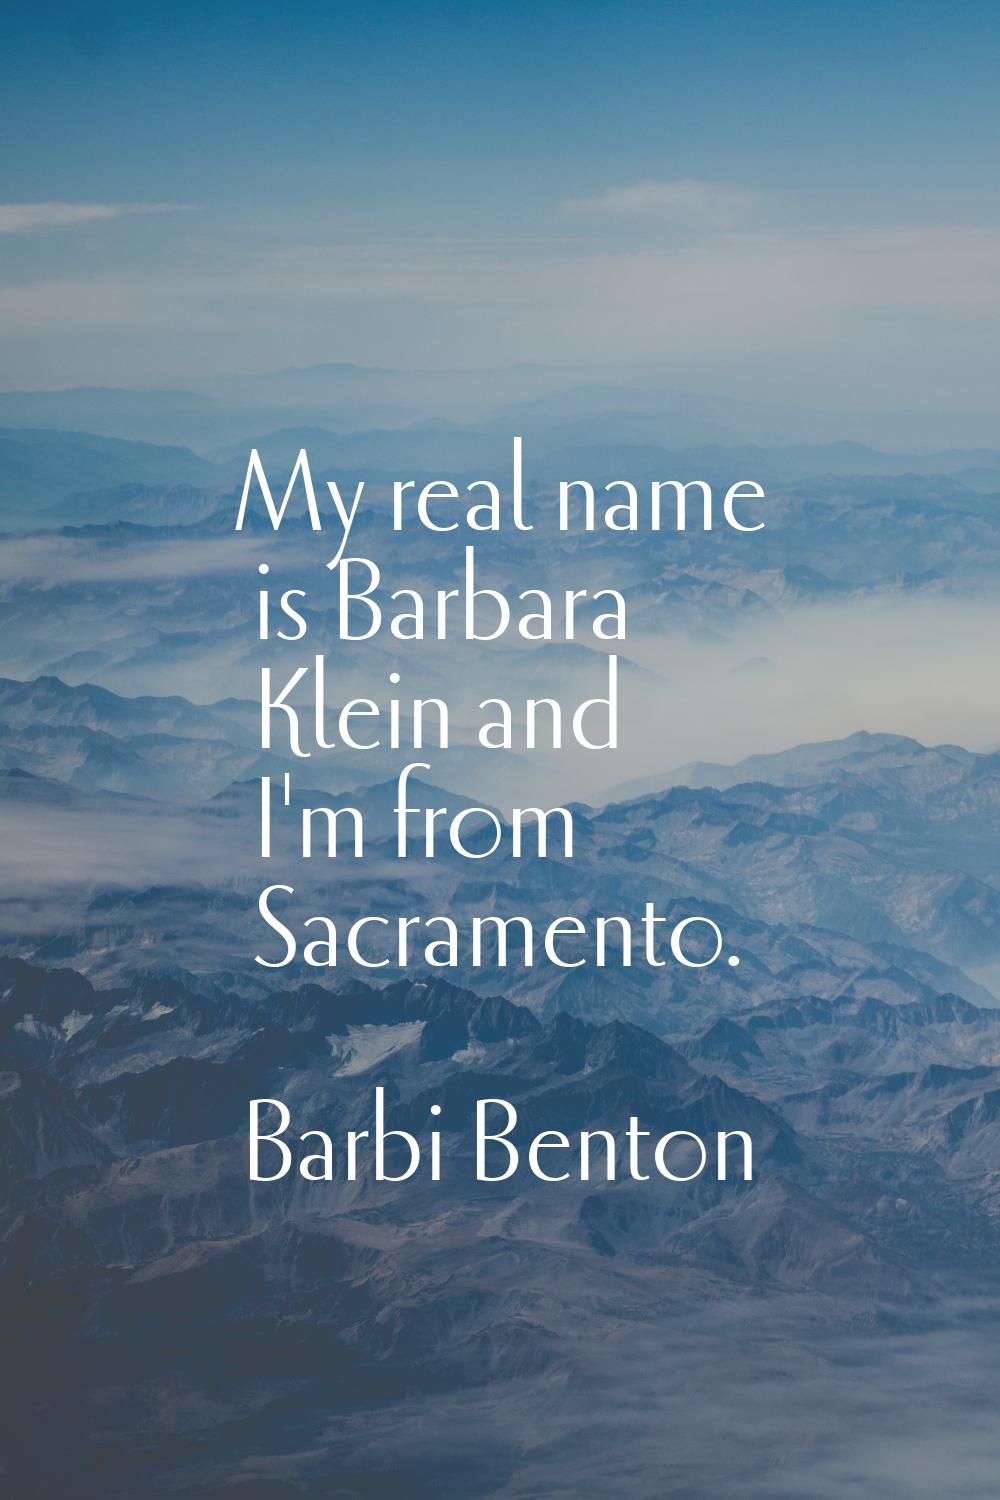 My real name is Barbara Klein and I'm from Sacramento.